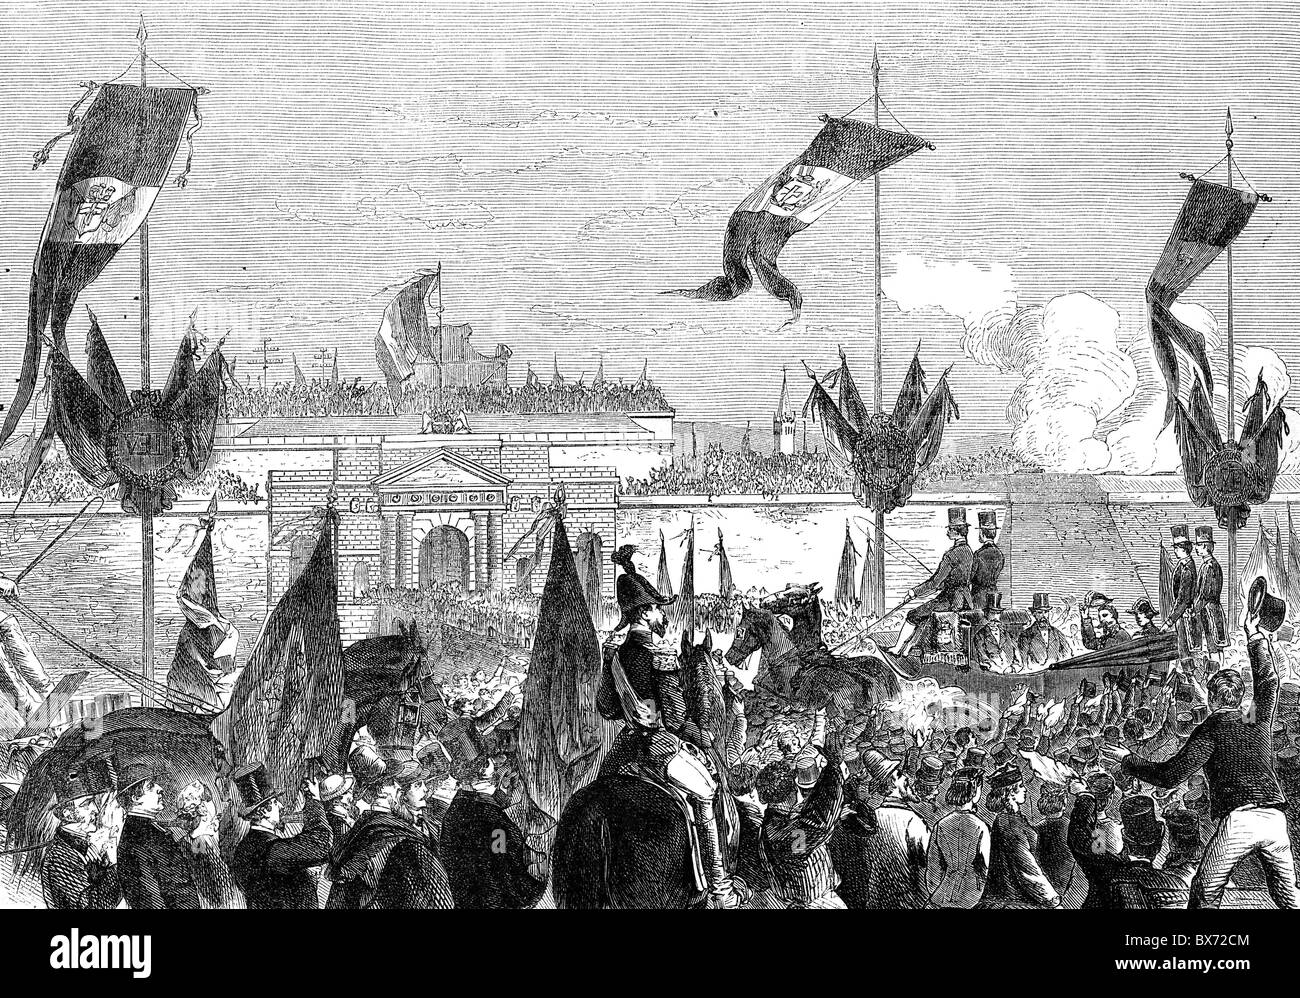 Victor Emmanuel II of Italy, 14.3.1820 - 9.1.1878, King of Italy 1861 - 1878, scene, the king arriving at the Porta Nuova in Verona, welcomed by a cheering crowd, contemporary wood engraving, Stock Photo